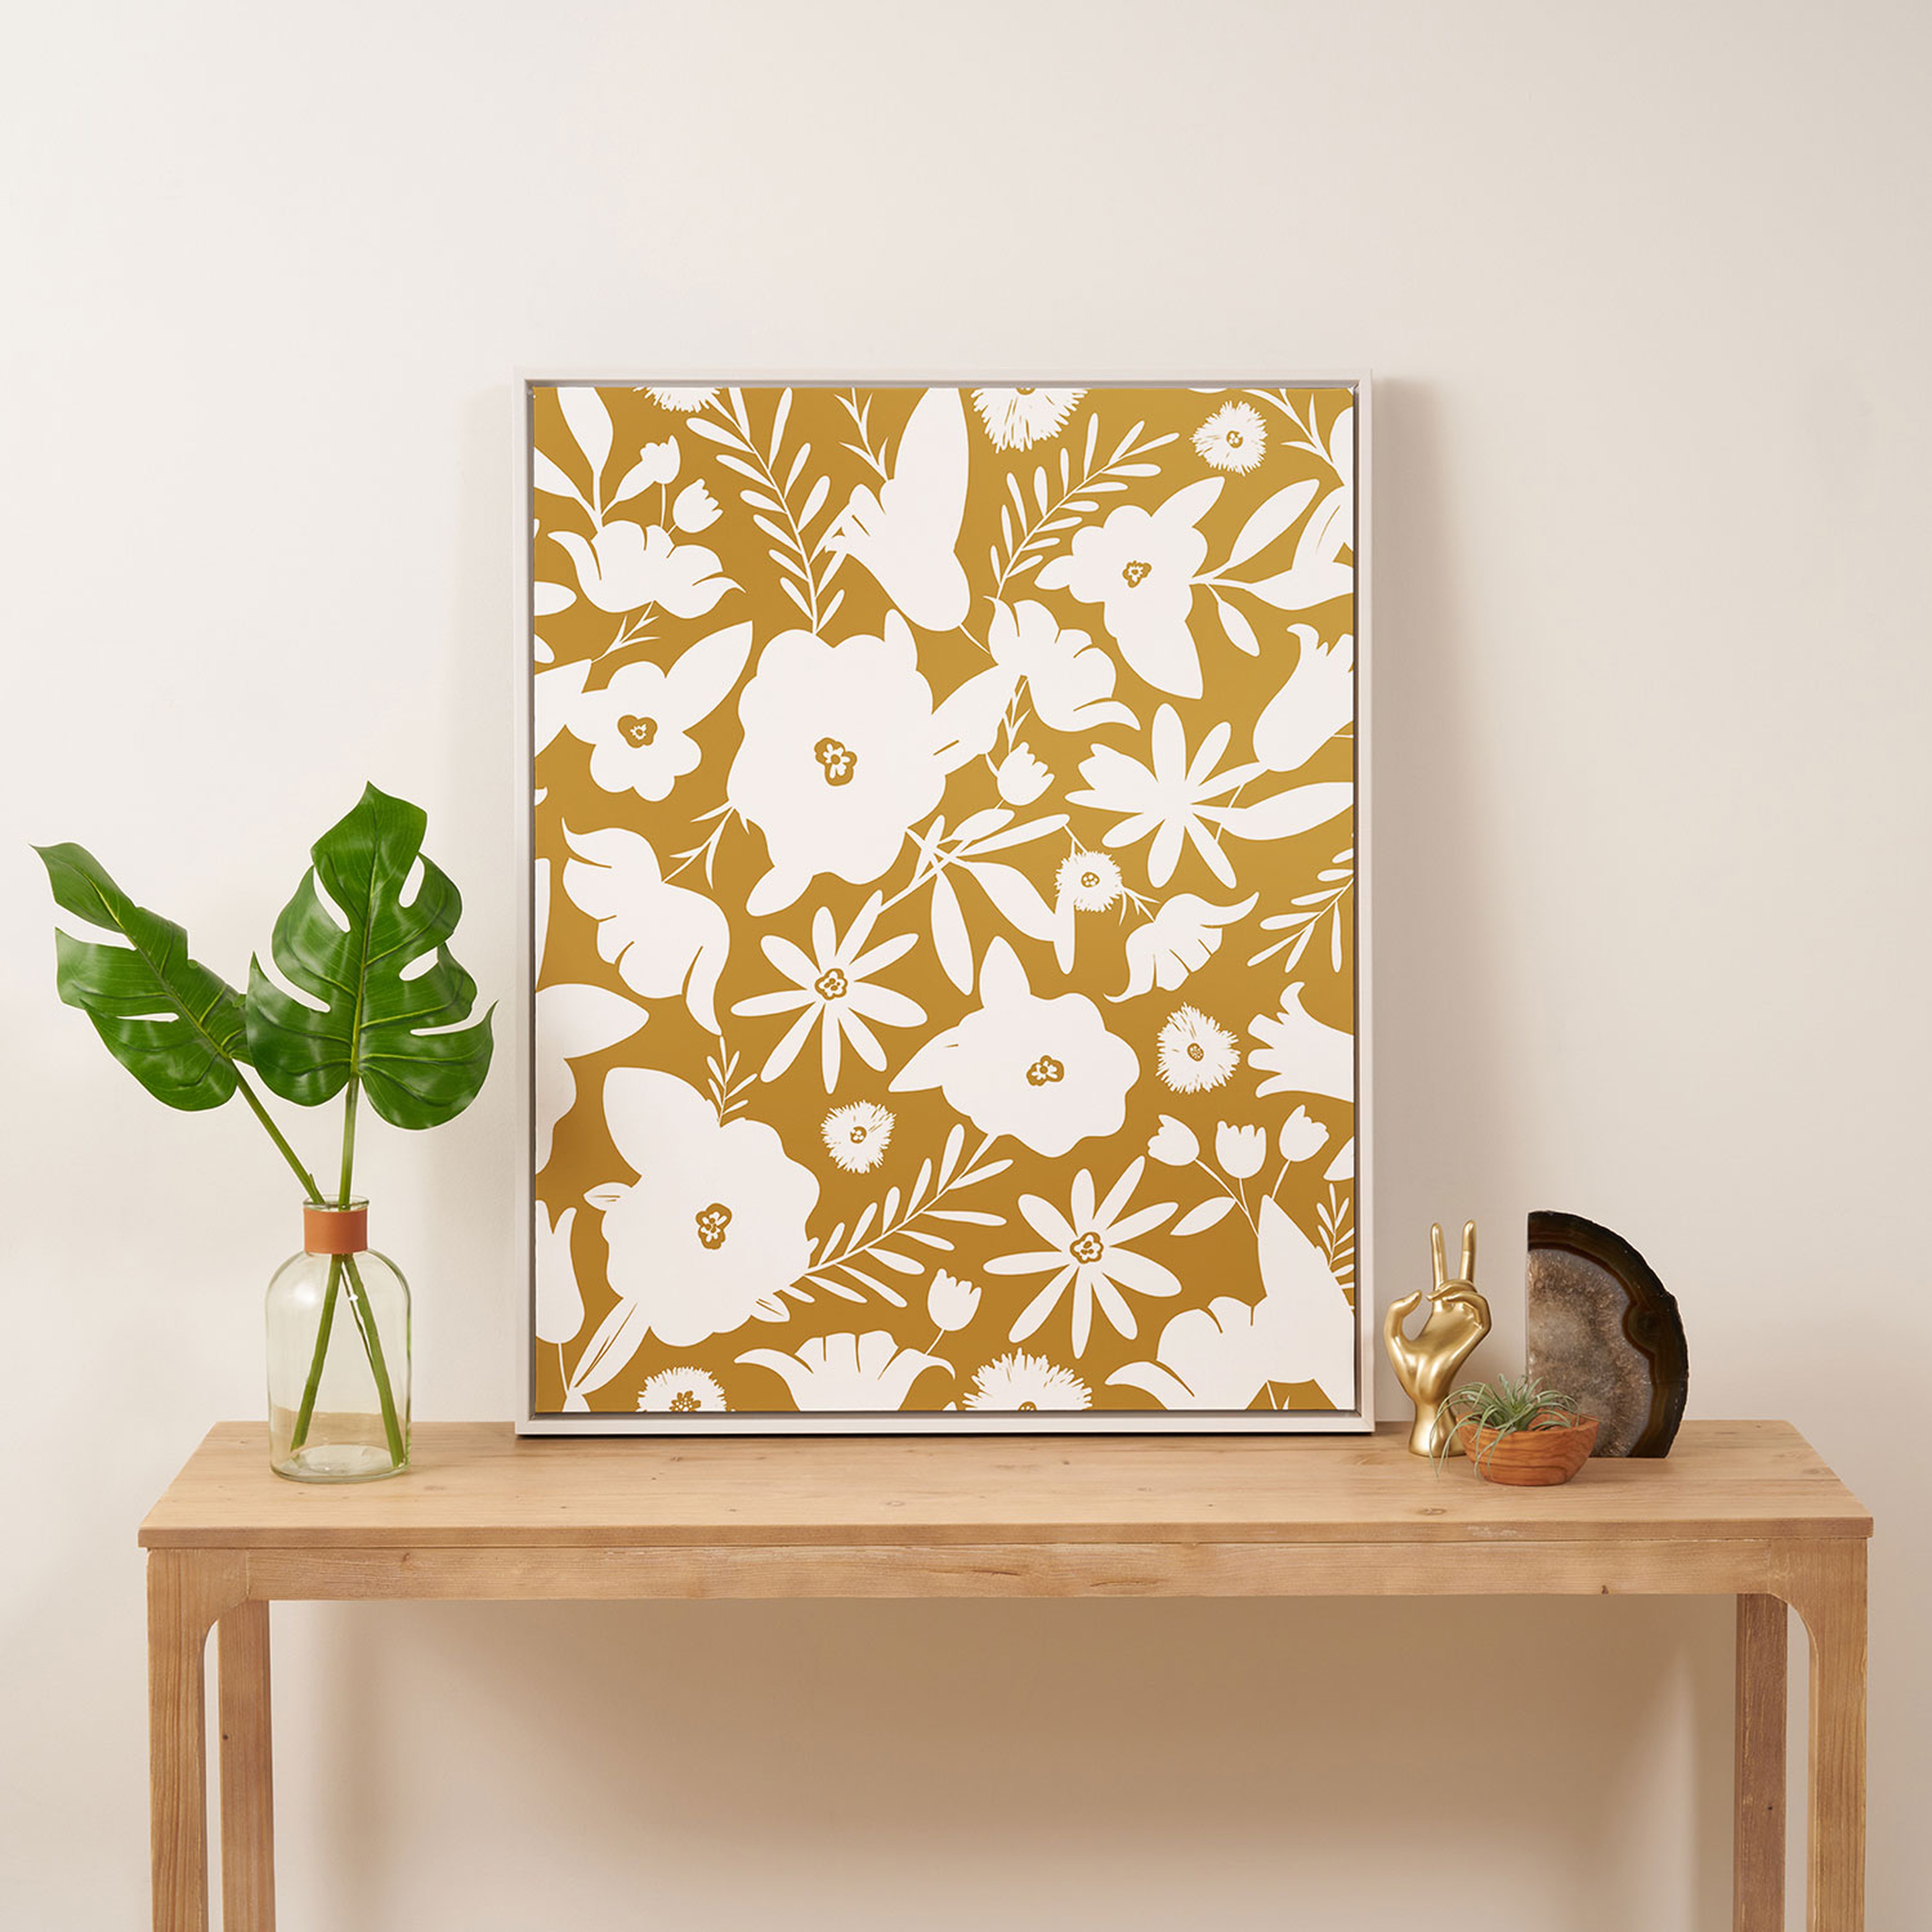 Finley Floral Goldenrod by Heather Dutton - Art Canvas 24" x 30" - Wander Print Co.